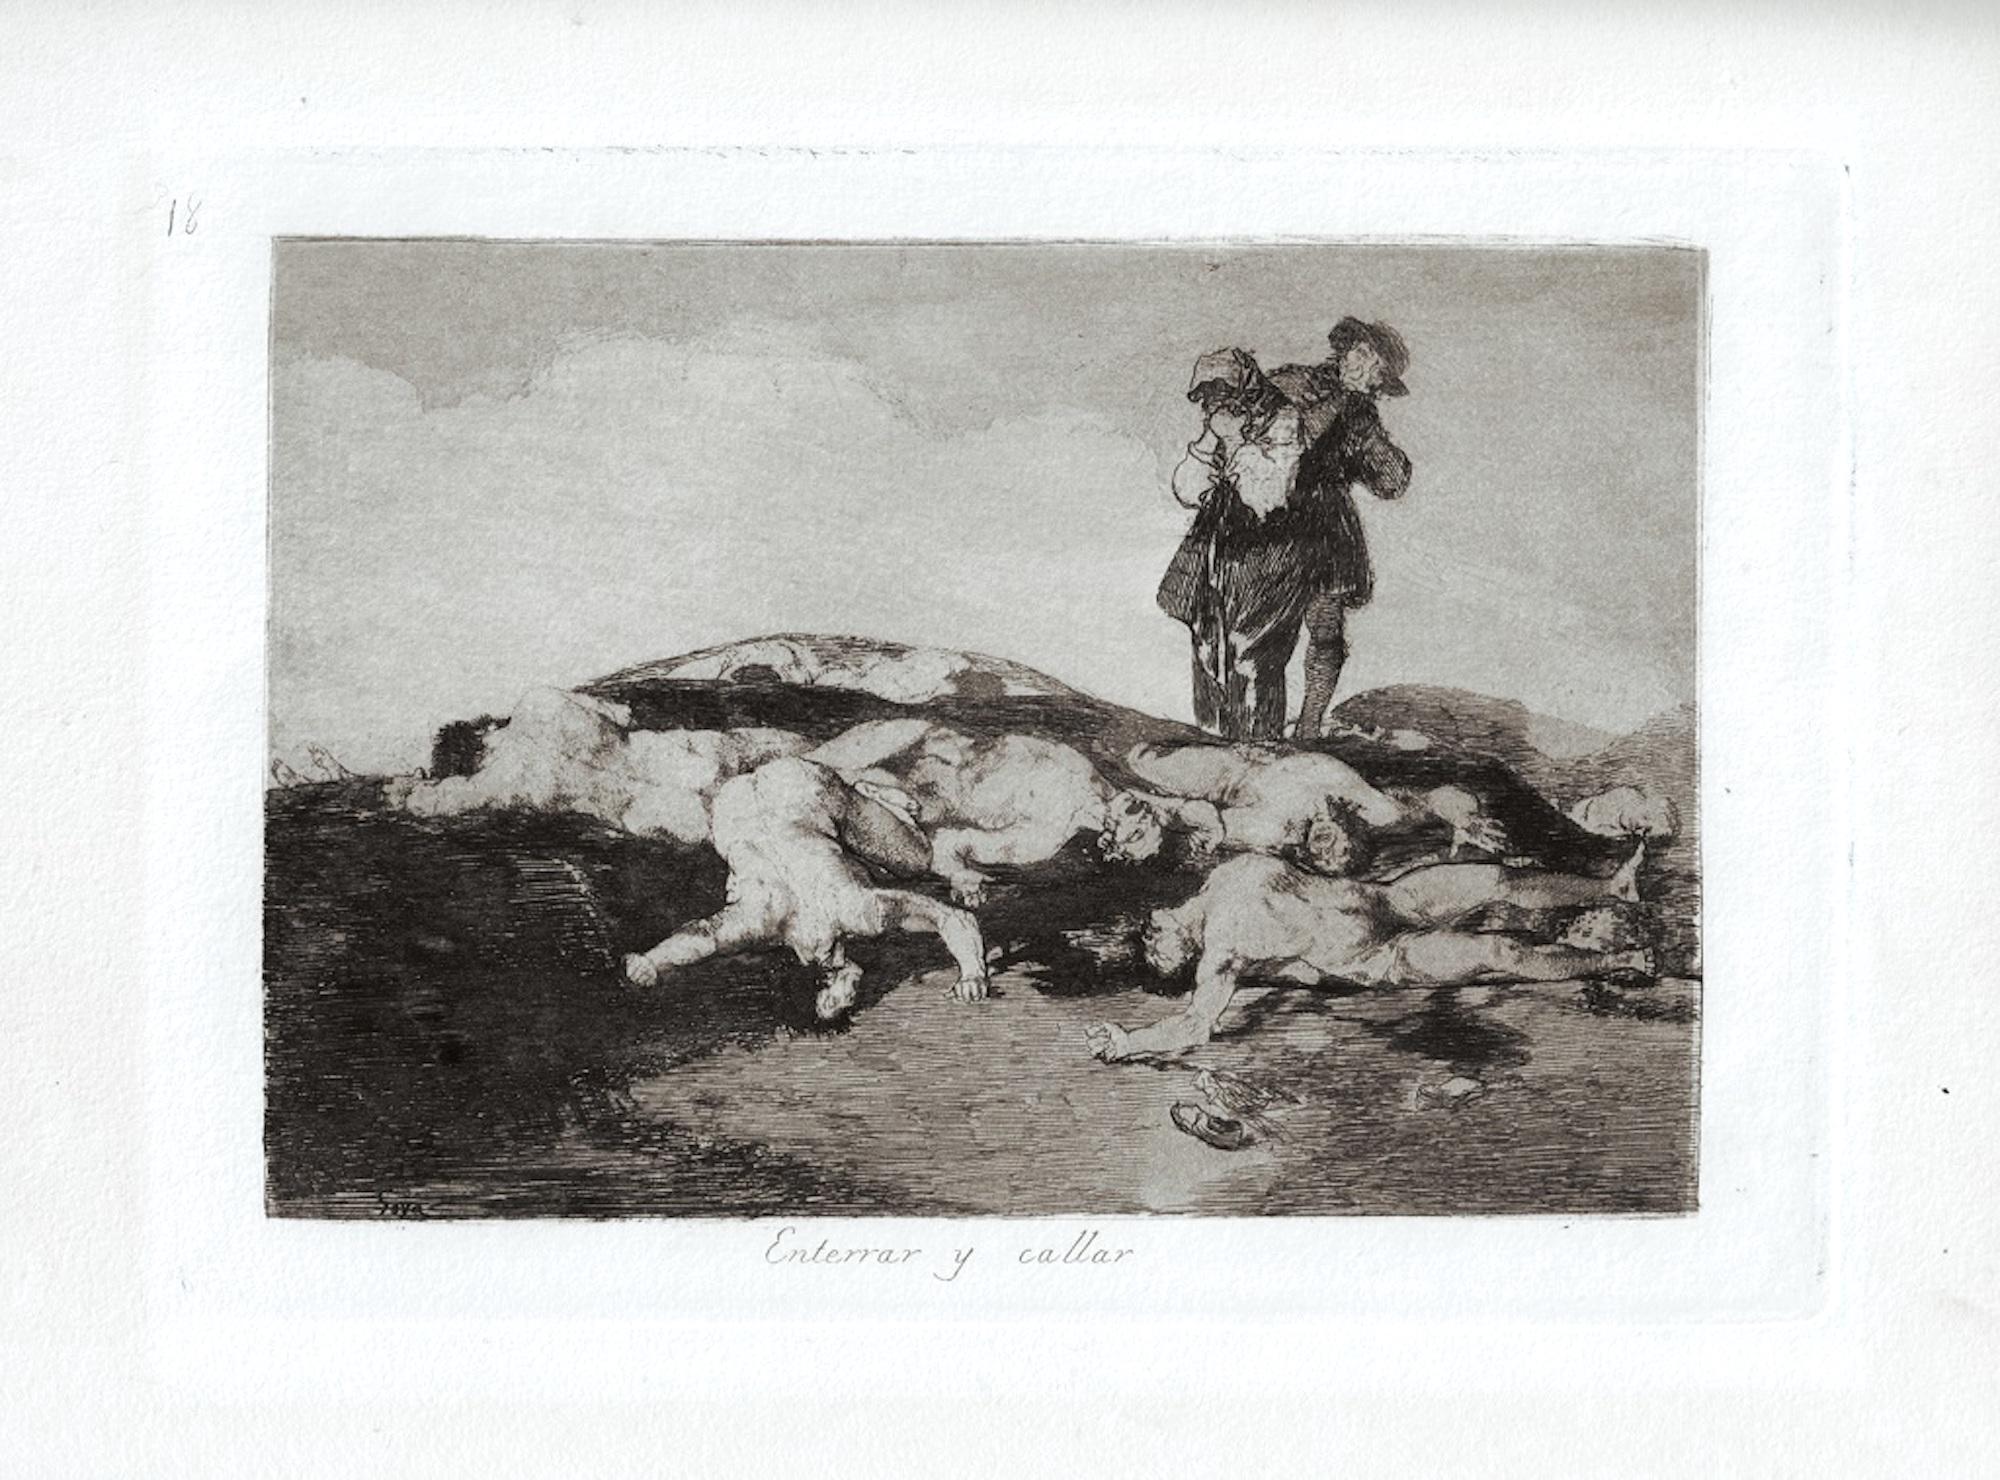 Enterrar y Callar is an original artwork realized by the great Spanish artist Francisco Goya in 1810. 

Original Etching on paper. 

The artwork belongs to the famous series "Los Desastres de la Guerra" realized during the years of the Independence